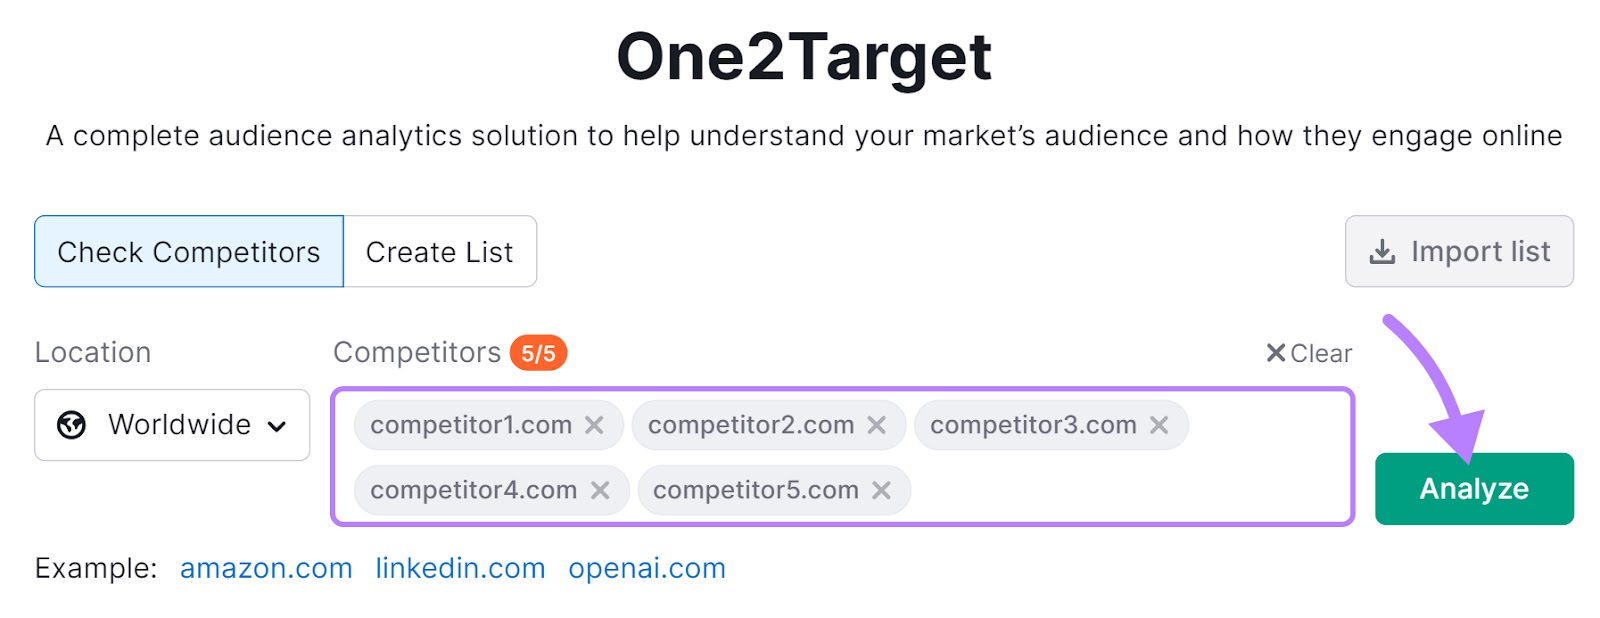 One2Target search bar with competitors entered.